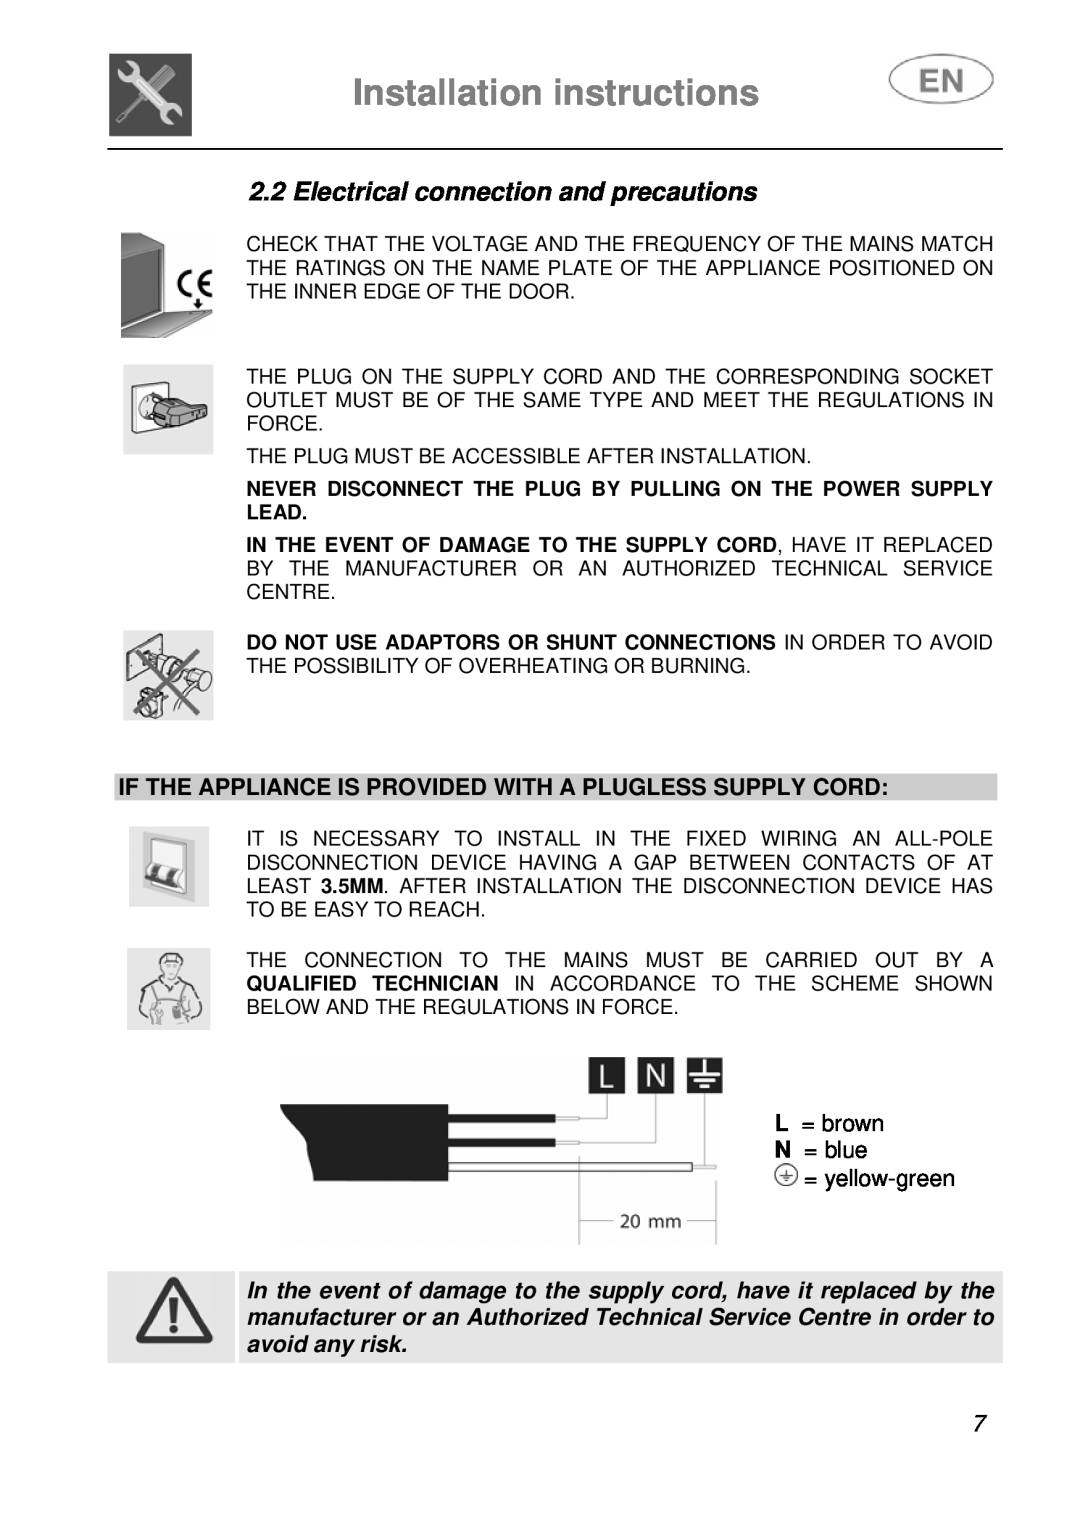 Smeg LSA643XPQ instruction manual Installation instructions, Electrical connection and precautions 